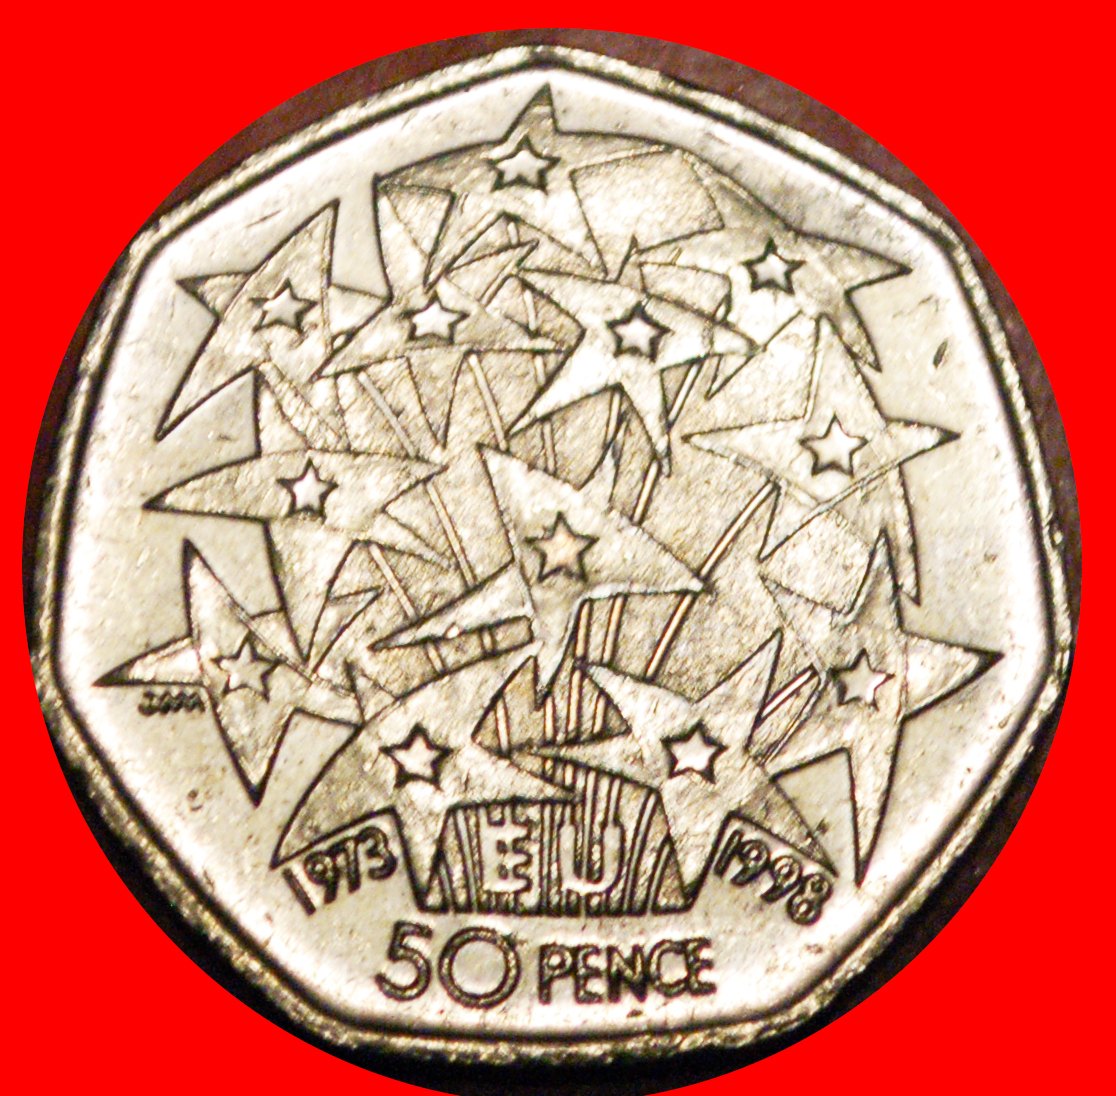  * STARS (1998-2009): GREAT BRITAIN ★ 50 PENCE 1973 1998!★LOW START ★ NO RESERVE!   